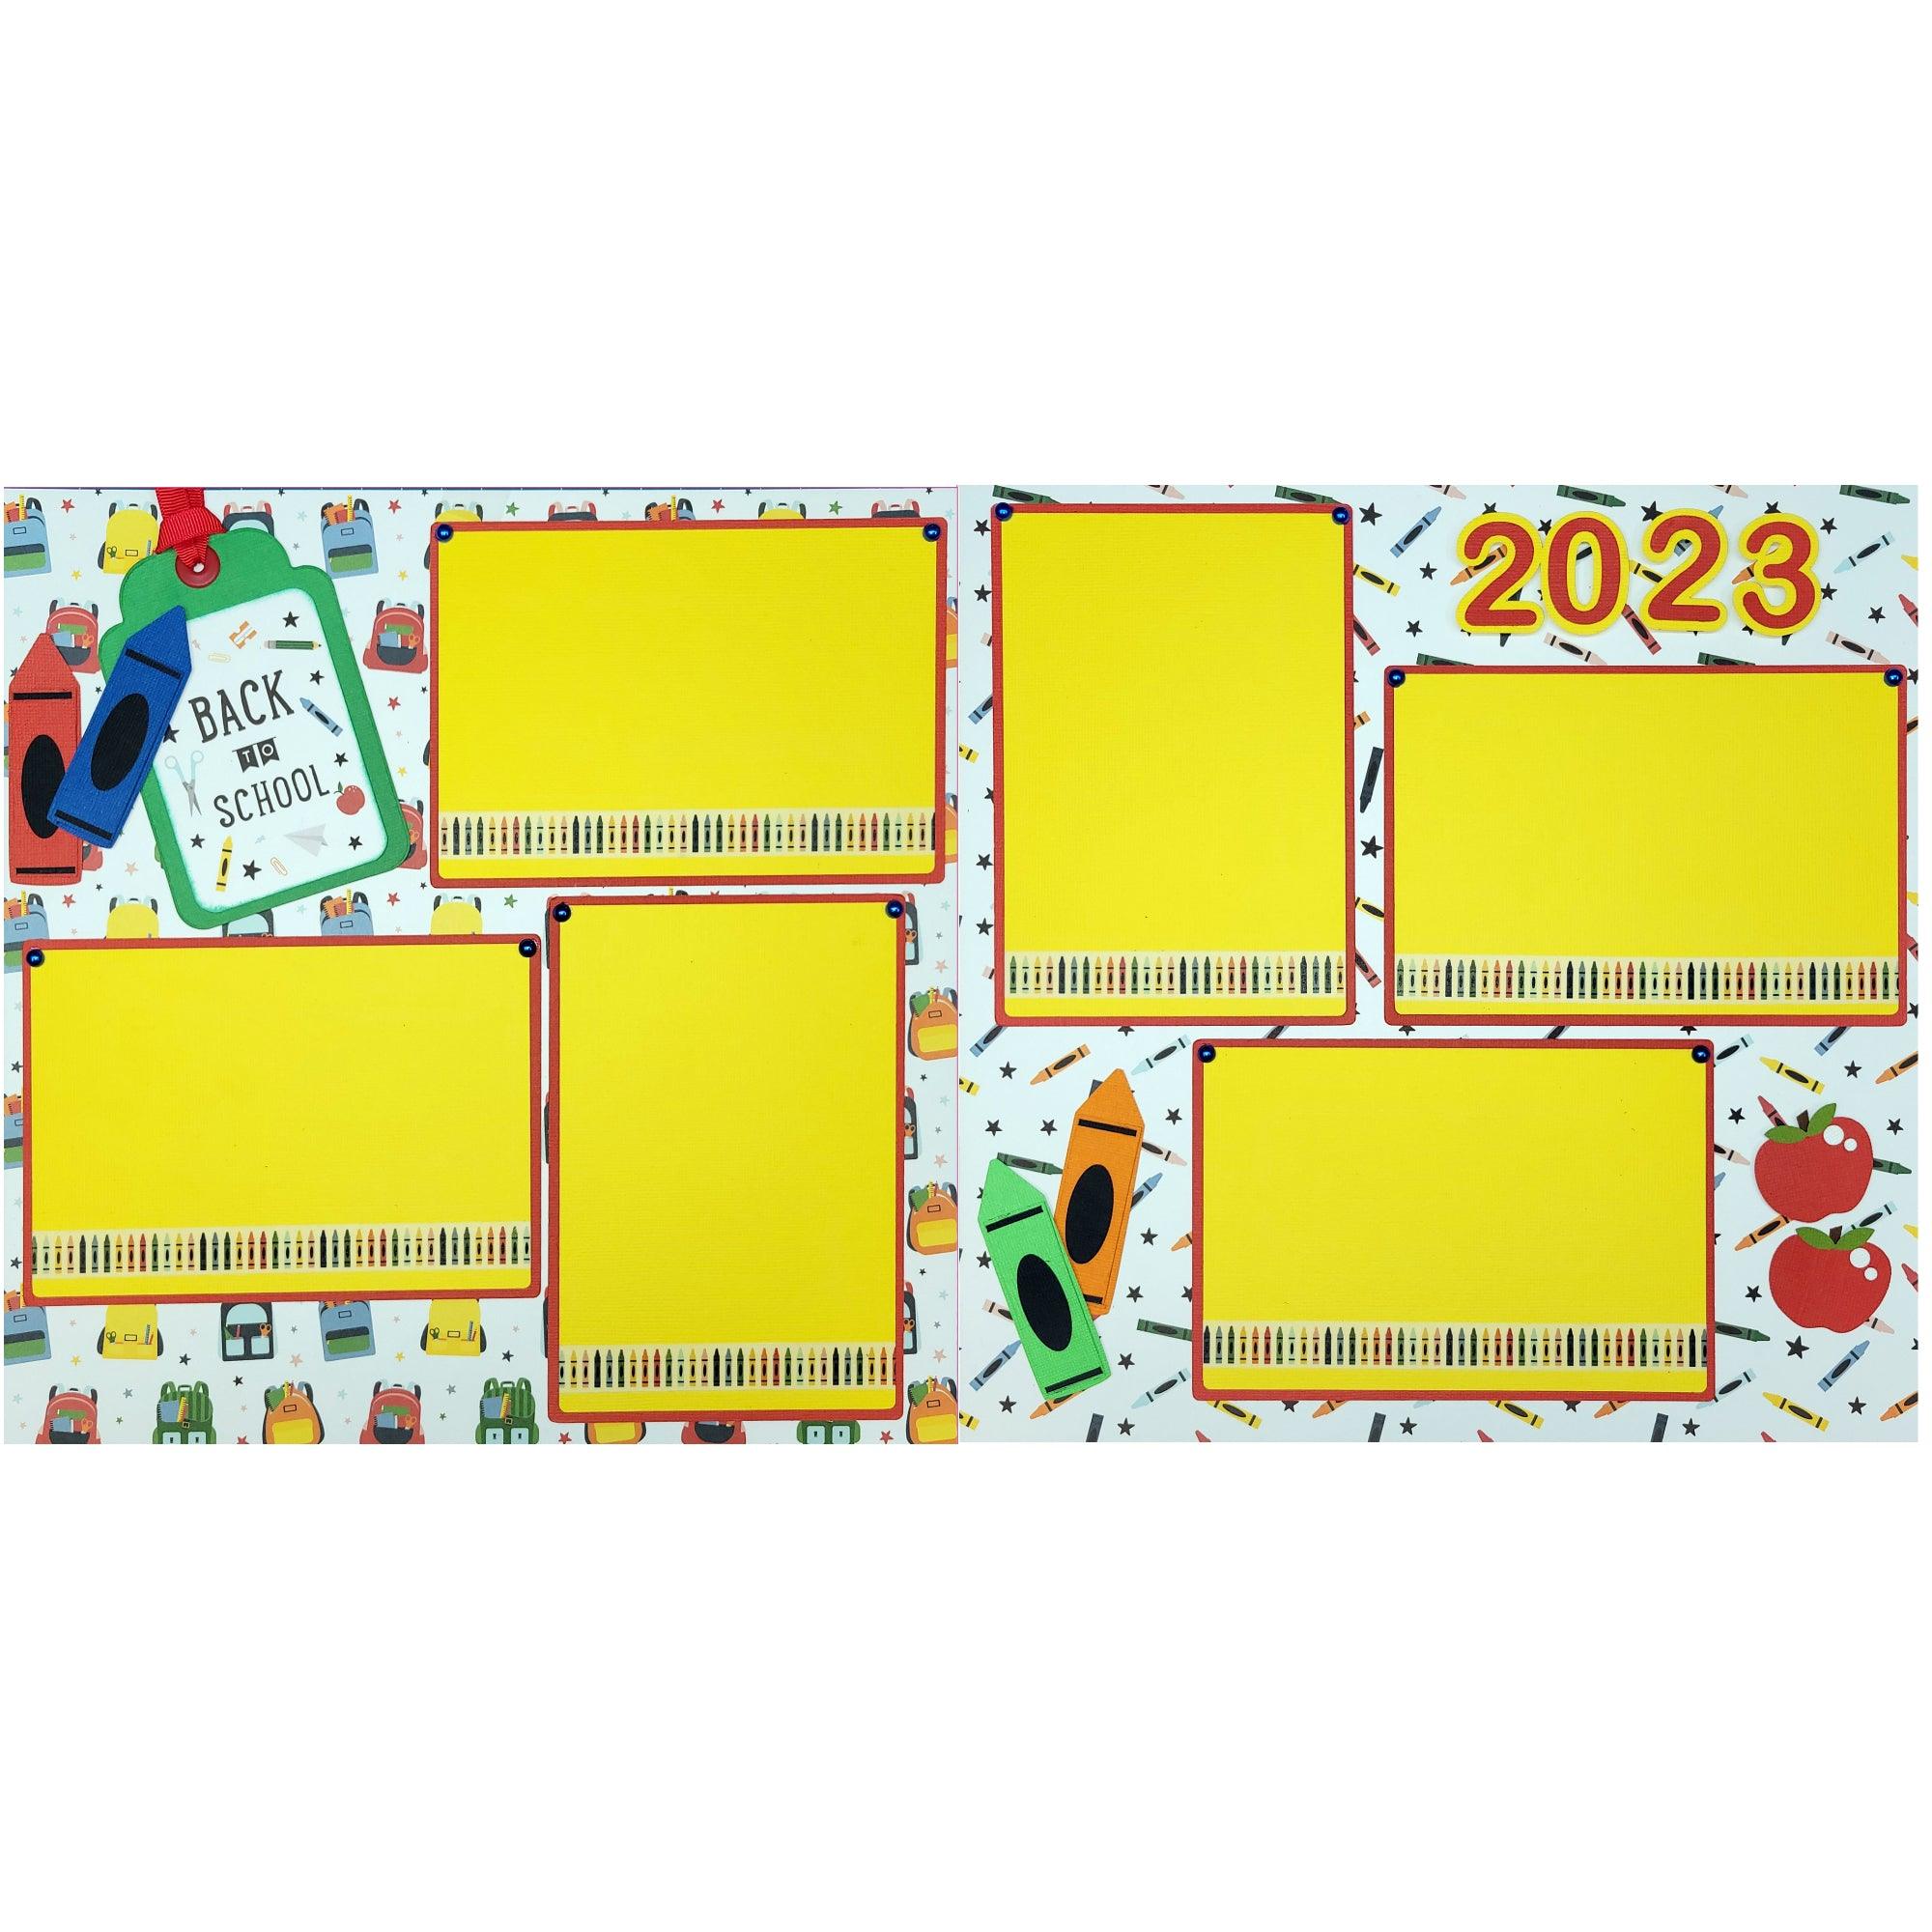 Back To School  2 - 12 x 12 Pages - Premade, Fully-Assembled and Hand-Embellished Scrapbook Premade by SSC Designs